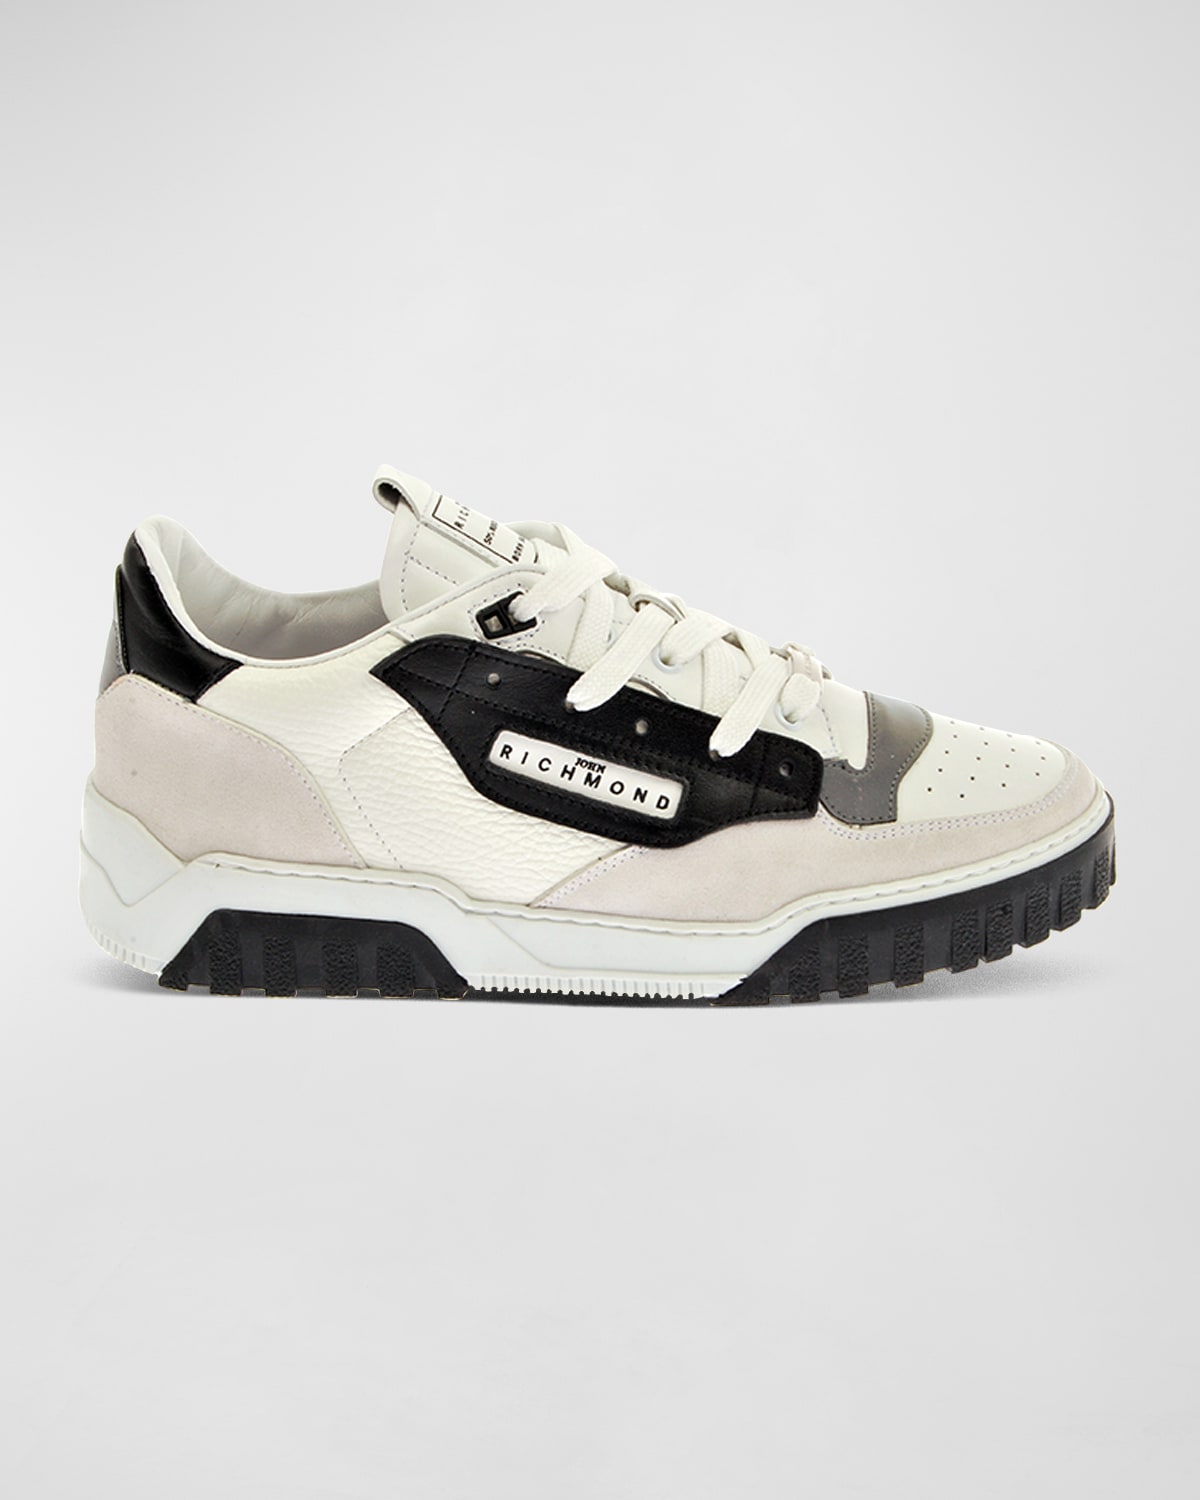 John Richmond Men's Leather-suede Low-top Sneakers In White/black